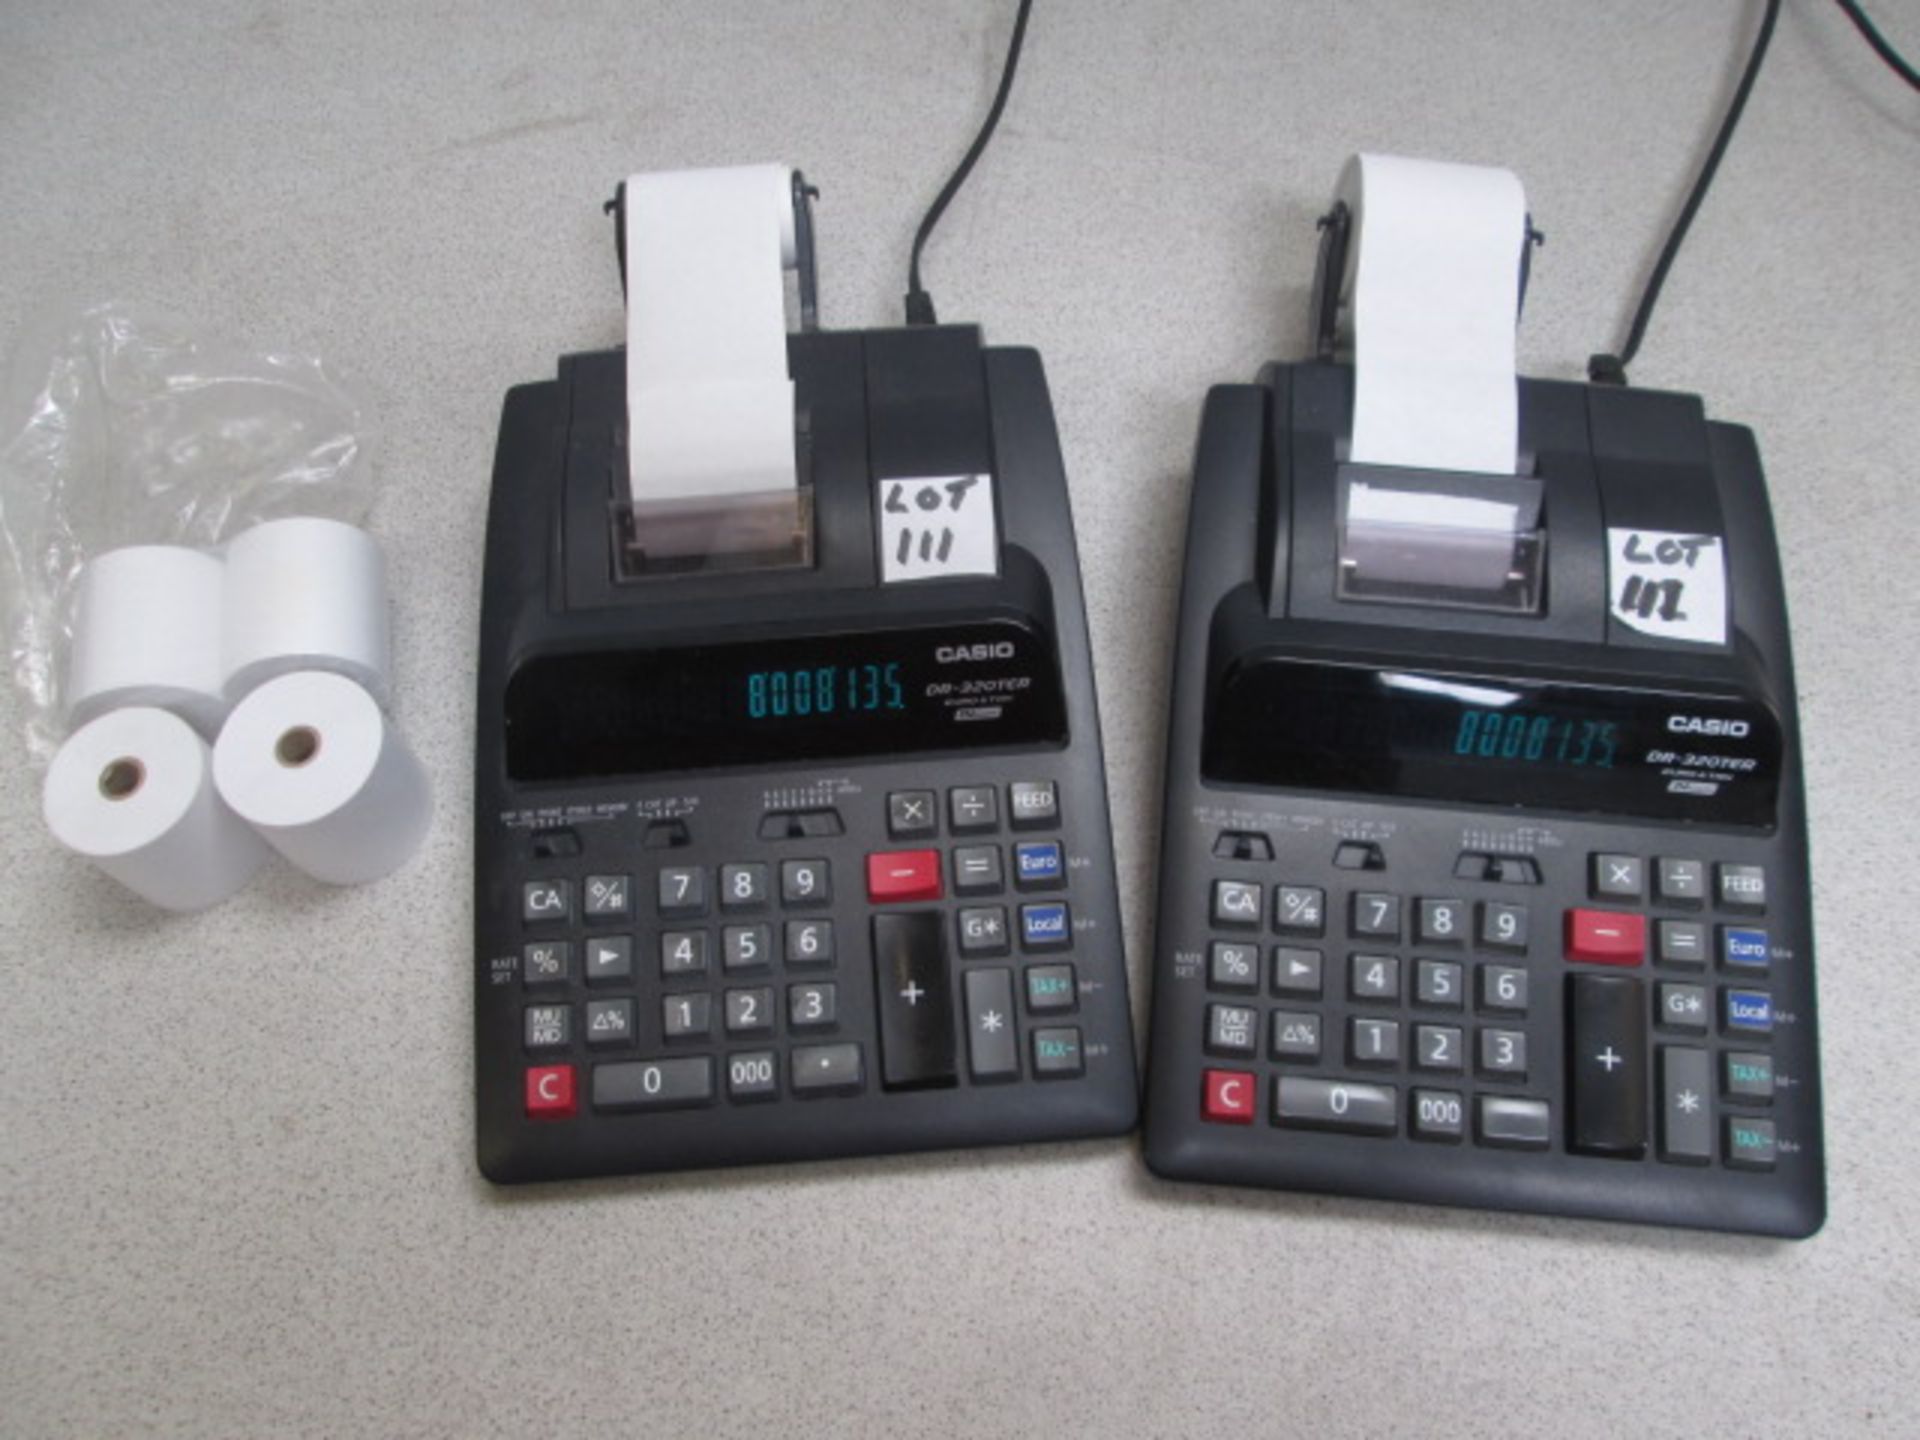 2 x Casio DR-320TER Printing Calculator. Comes with 4 Paper Rolls